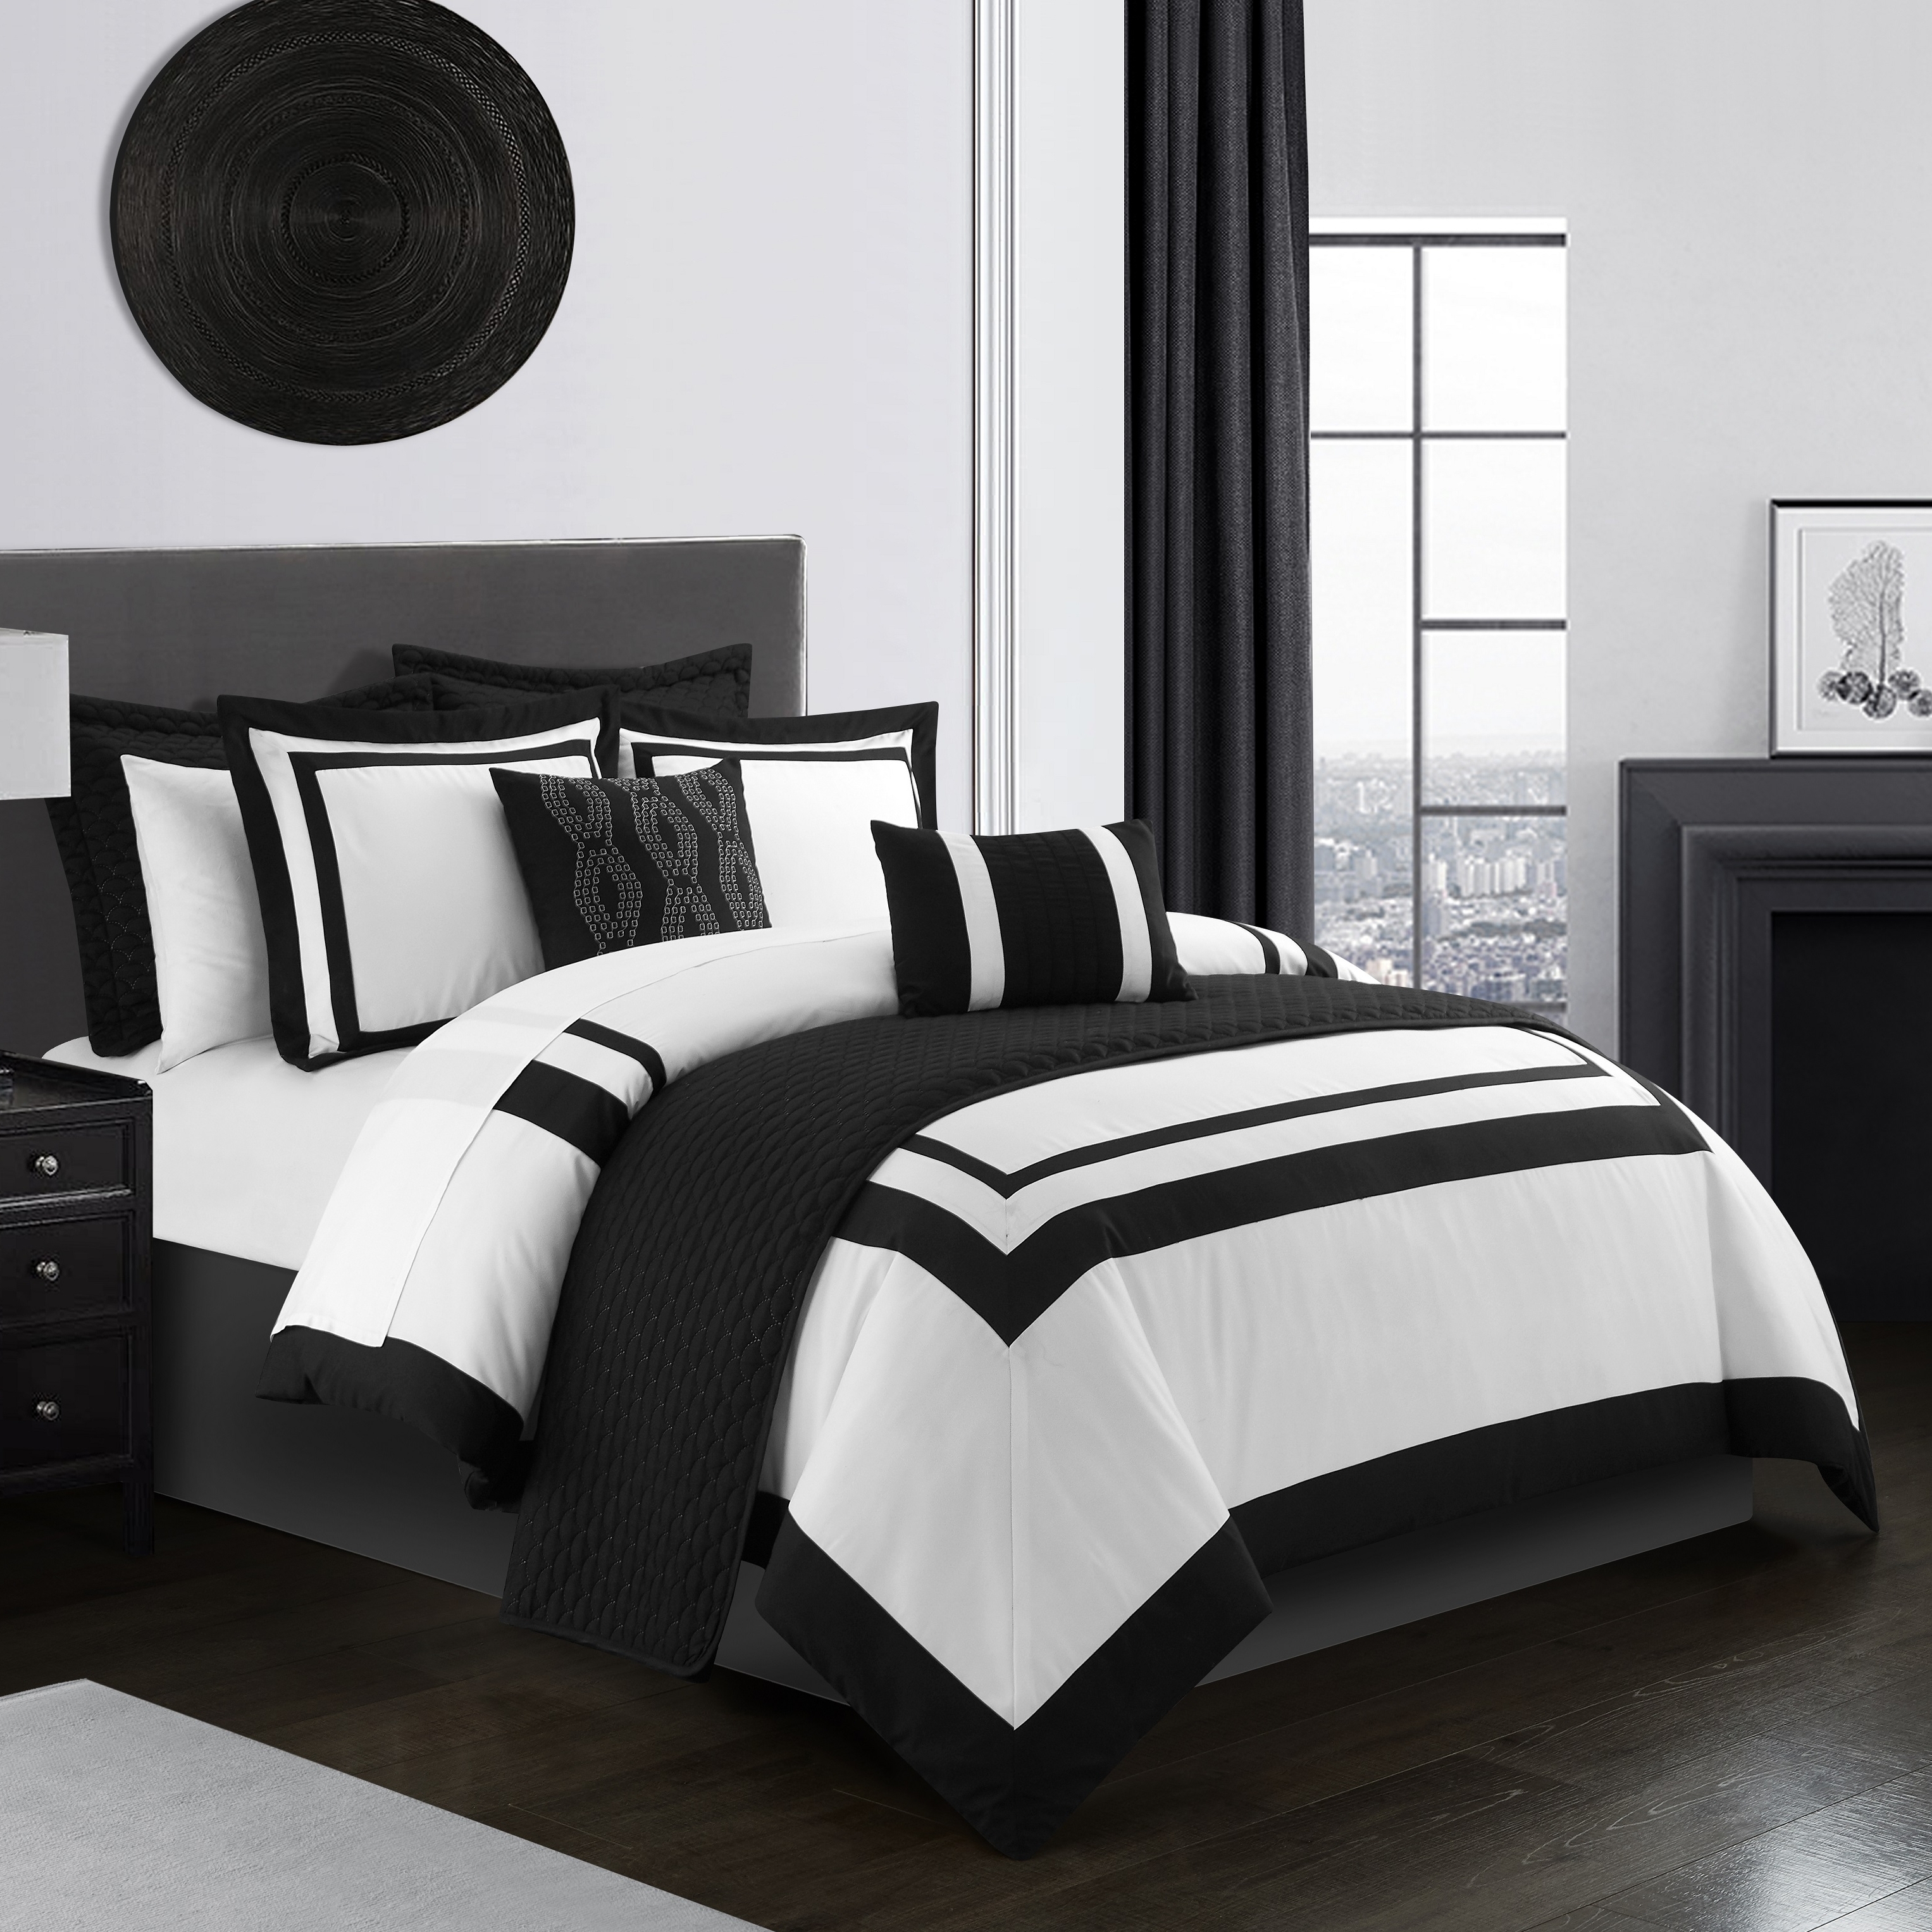 Hortense 8 Or 6 Piece Comforter And Quilt Set Hotel Collection - Black, Twin - 6 Piece